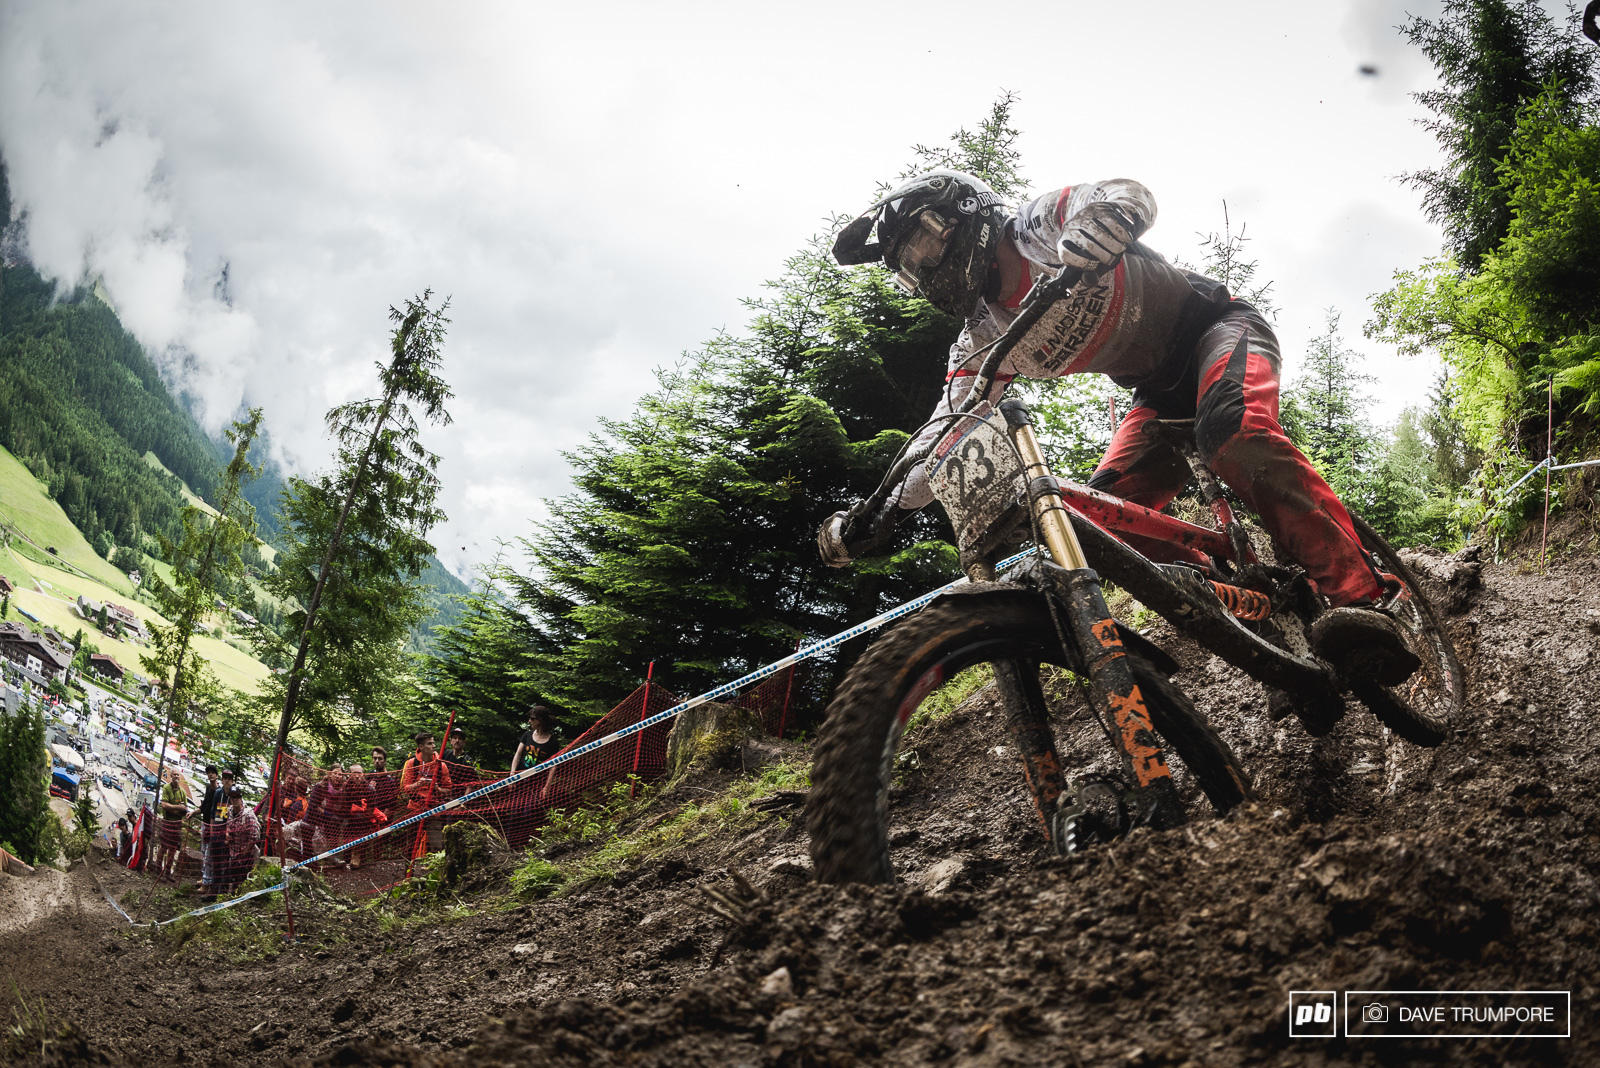 Matt Simmonds blasts through the thick and drying mud on the last technical chute on track.